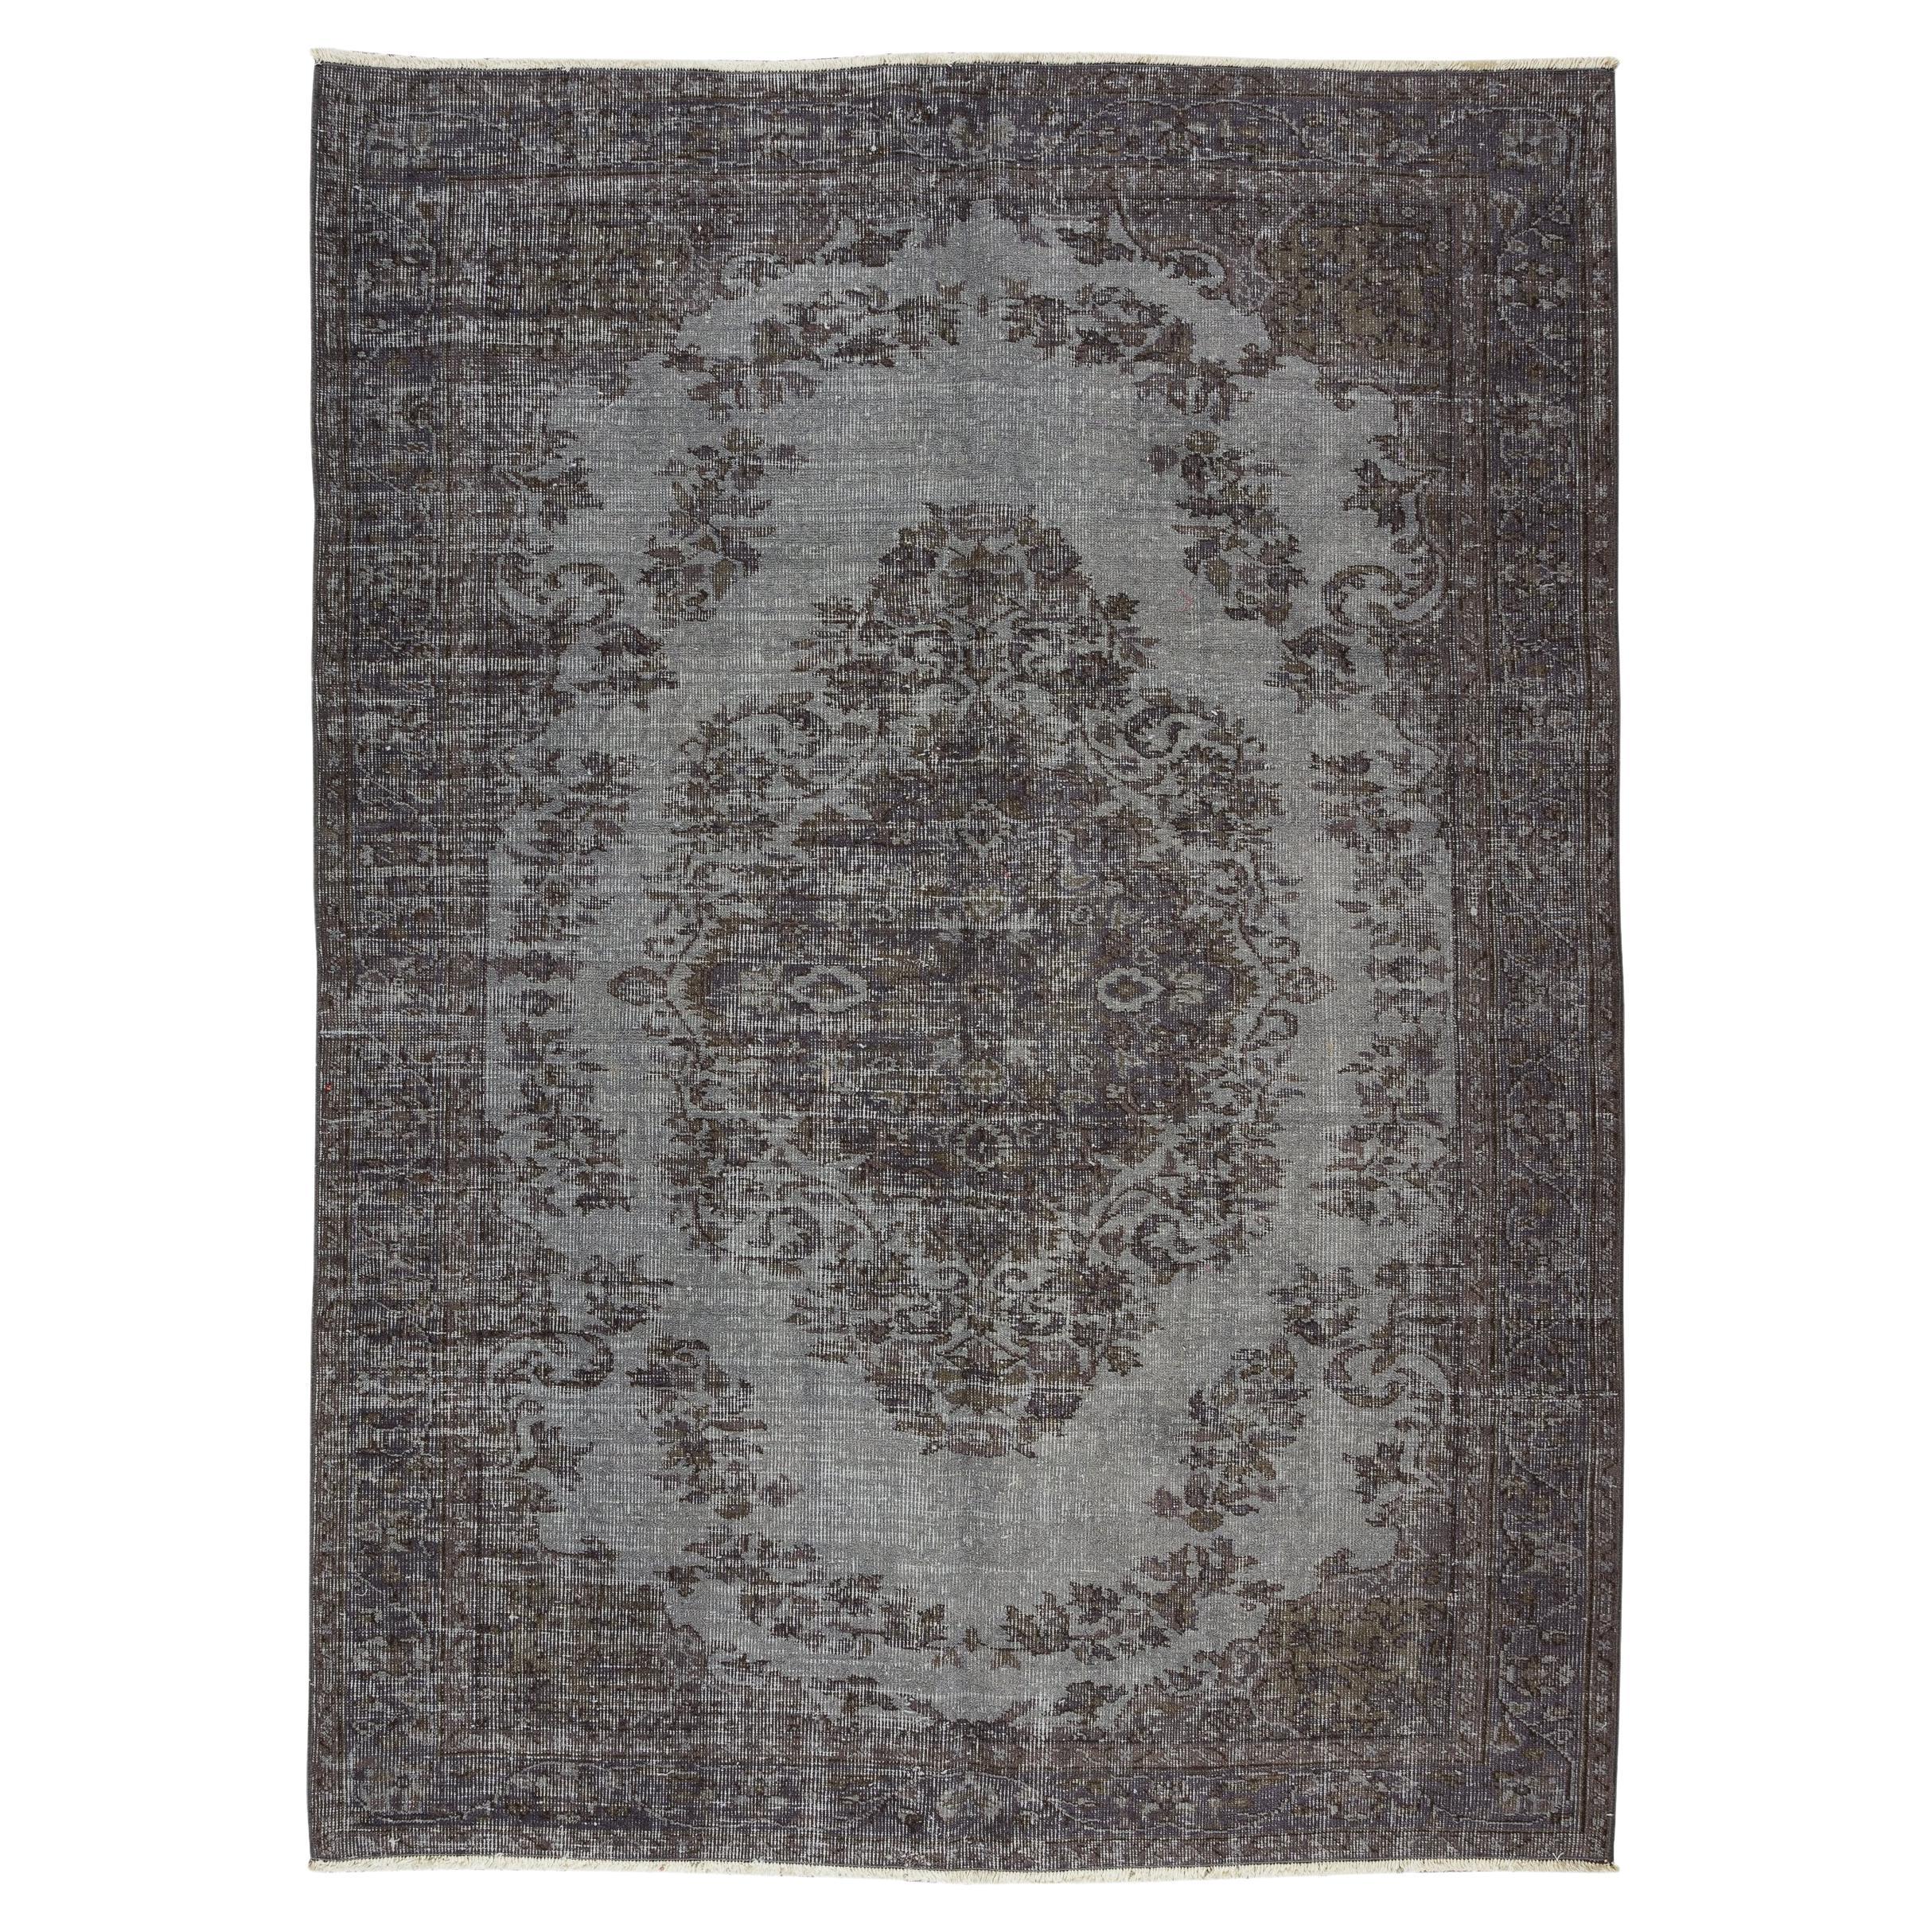 5.5x7.6 Ft Vintage Medallion Design Area Rug in Gray, Hand-Knotted in Turkey For Sale